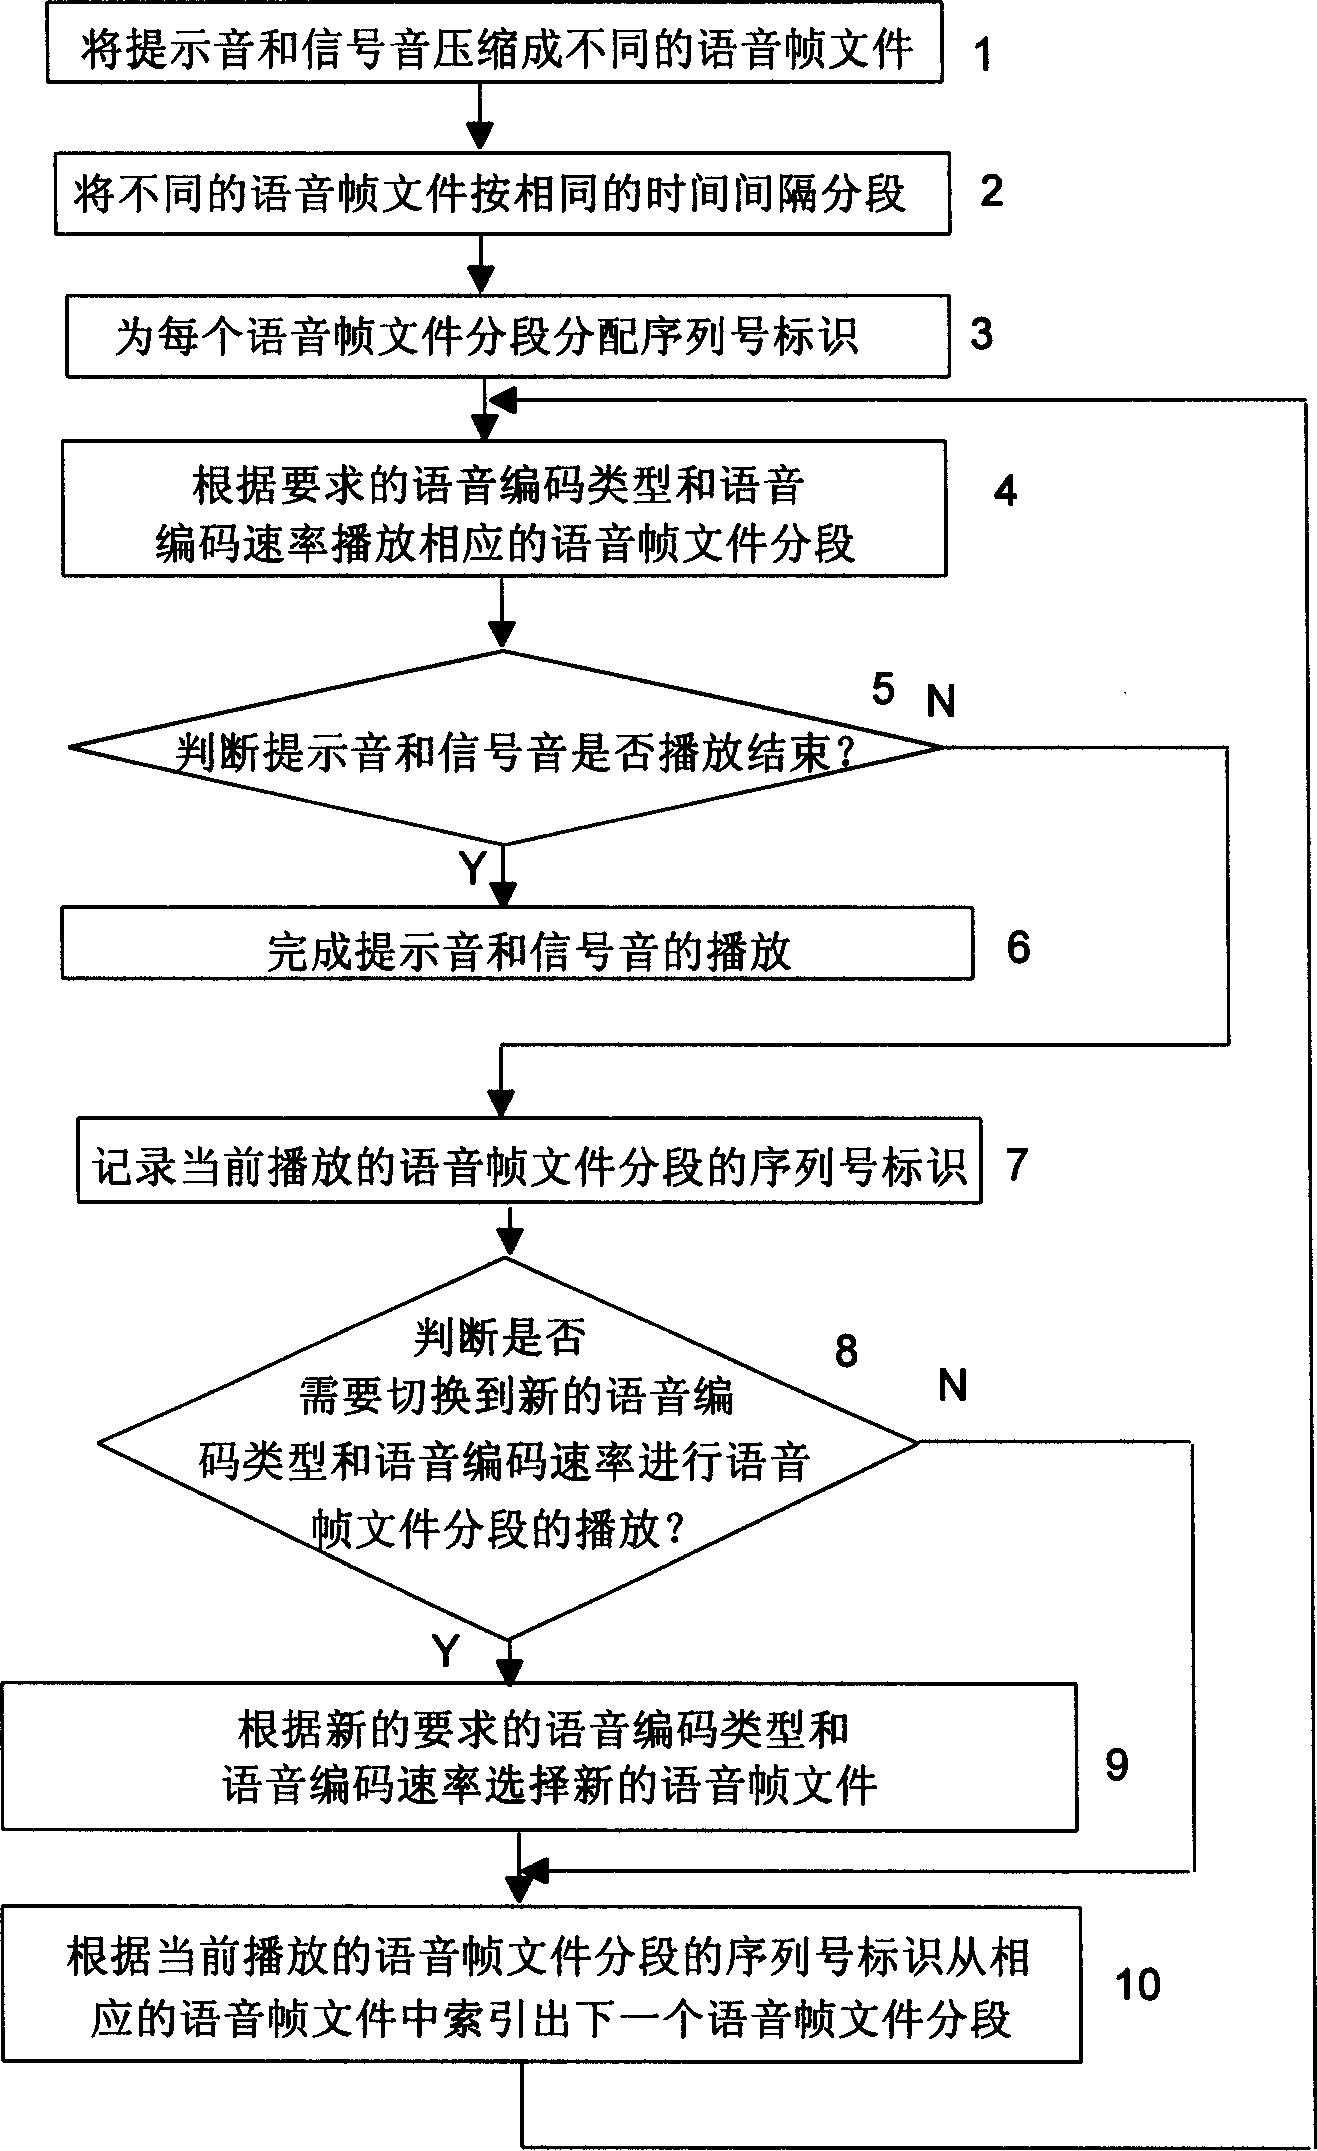 Method for realizing broadcast prompting sound and signal sound function in communication network